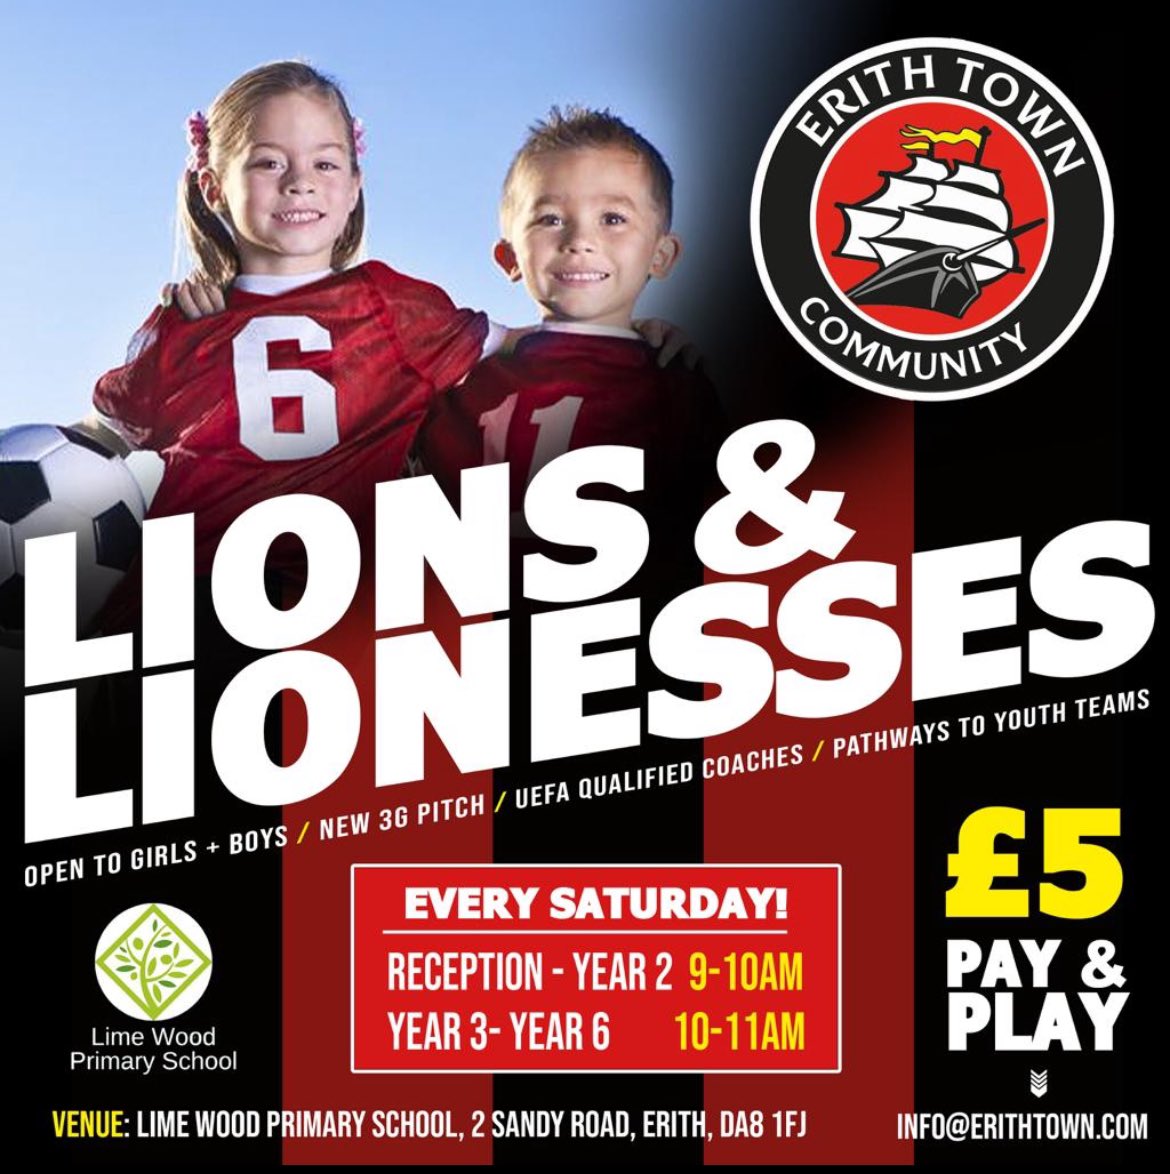 🦁🦁 SATURDAY MORNING! 🦁🦁

Lions & Lionesses football continues this morning at @limew00d !

No registration, just turn up and play, £5 per child.

Session times: 
Little Dockers 9am-10am
Reception - Year 2

Young Dockers 10am-11am 
Year 3 - Year 6

#WeAreDockers